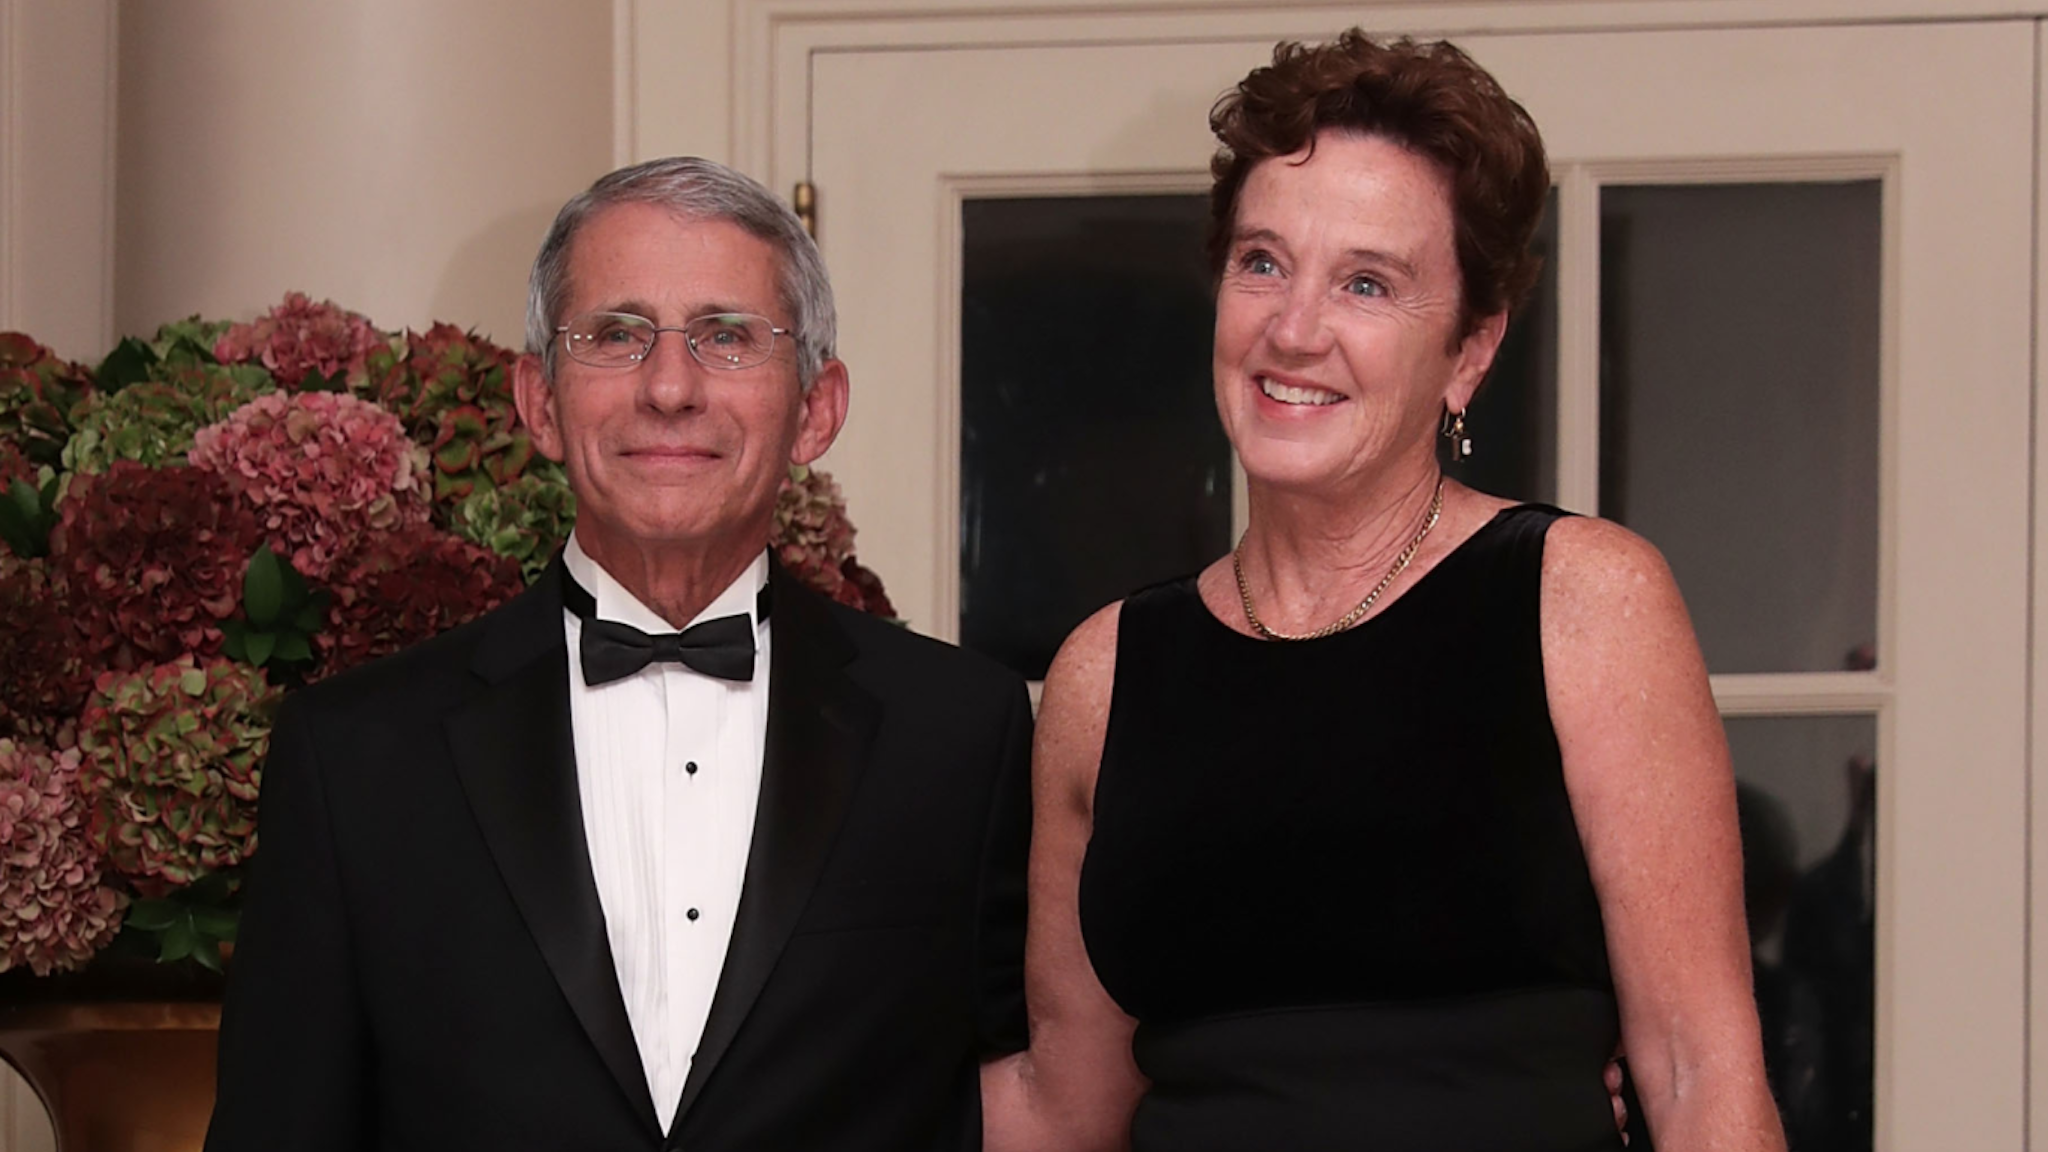 Director of the National Institute of Allergy & Infectious Diseases at the National Institute of Health Anthony Fauci and his wife Christine Grady arrive at the White House for a state dinner October 18, 2016 in Washington, DC. U.S. President Barack Obama is hosting a state dinner for Prime Minister of Italy Matteo Renzi and his wife Agnese Landini.